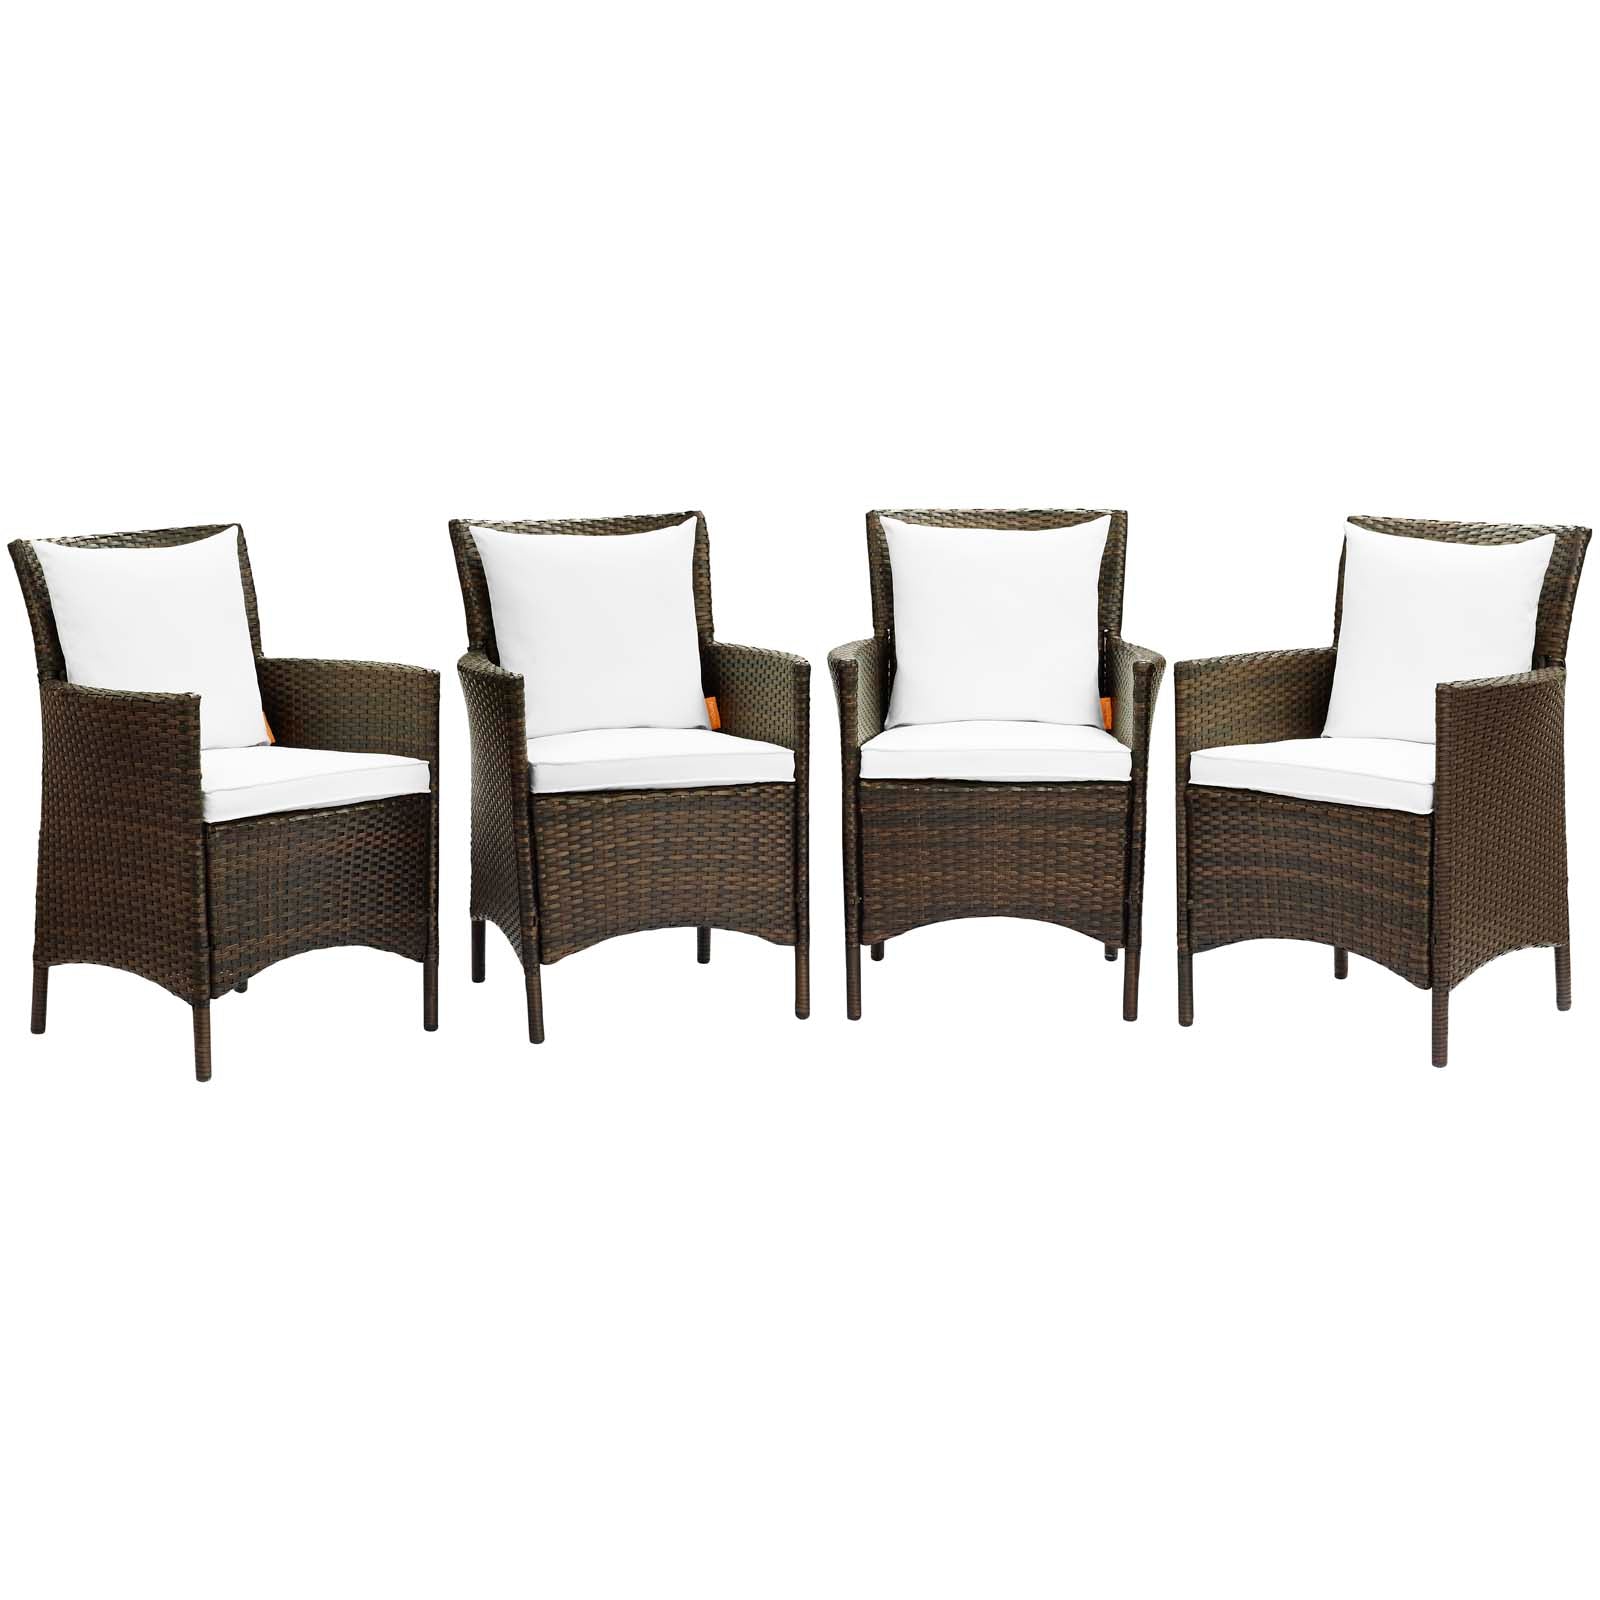 Modway Outdoor Dining Chairs - Conduit Outdoor Patio Wicker Rattan Dining Armchair Set of 4 Brown White